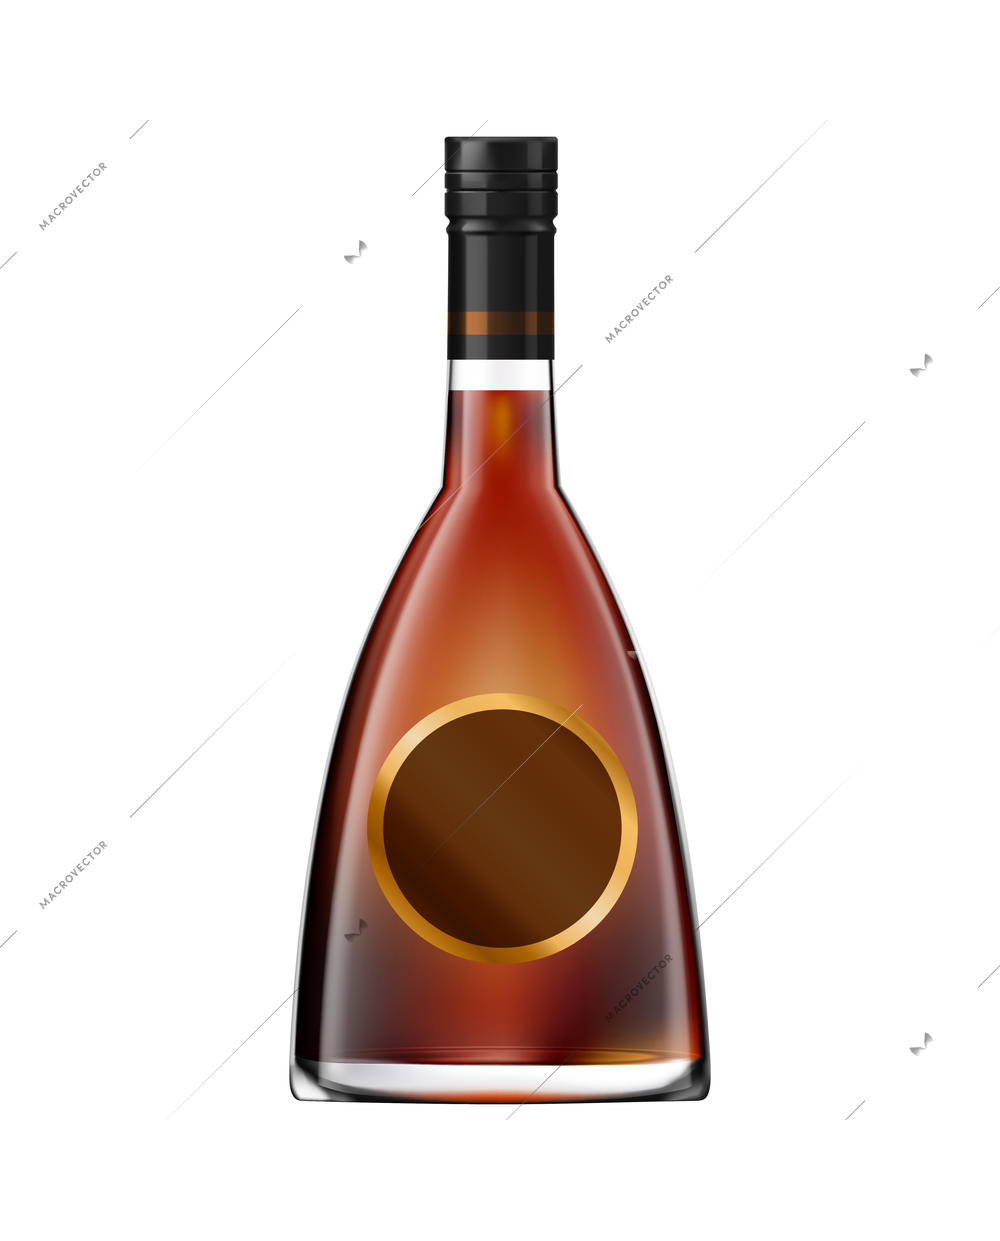 Glass bottle of whisky or cognac with screw cap and round label realistic vector illustration